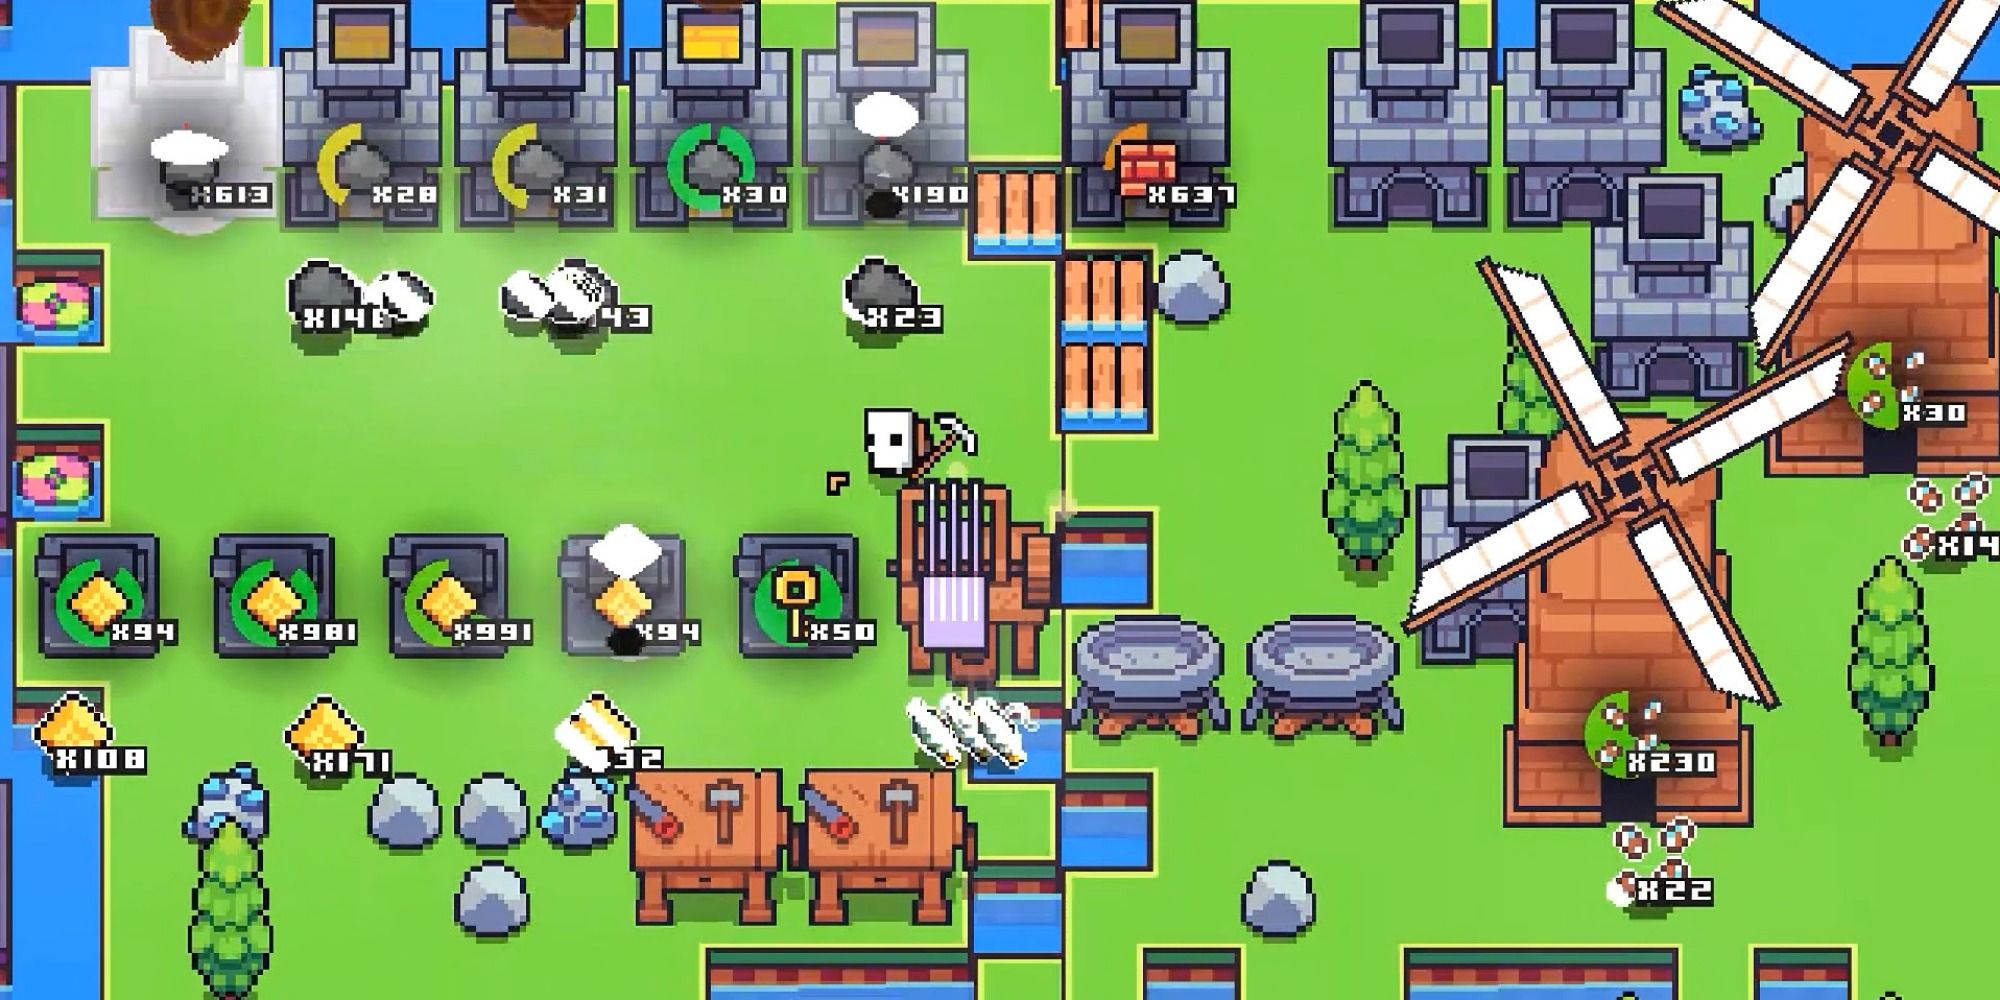 Dozens of machines operate on a grassy pixelated field to produce materials